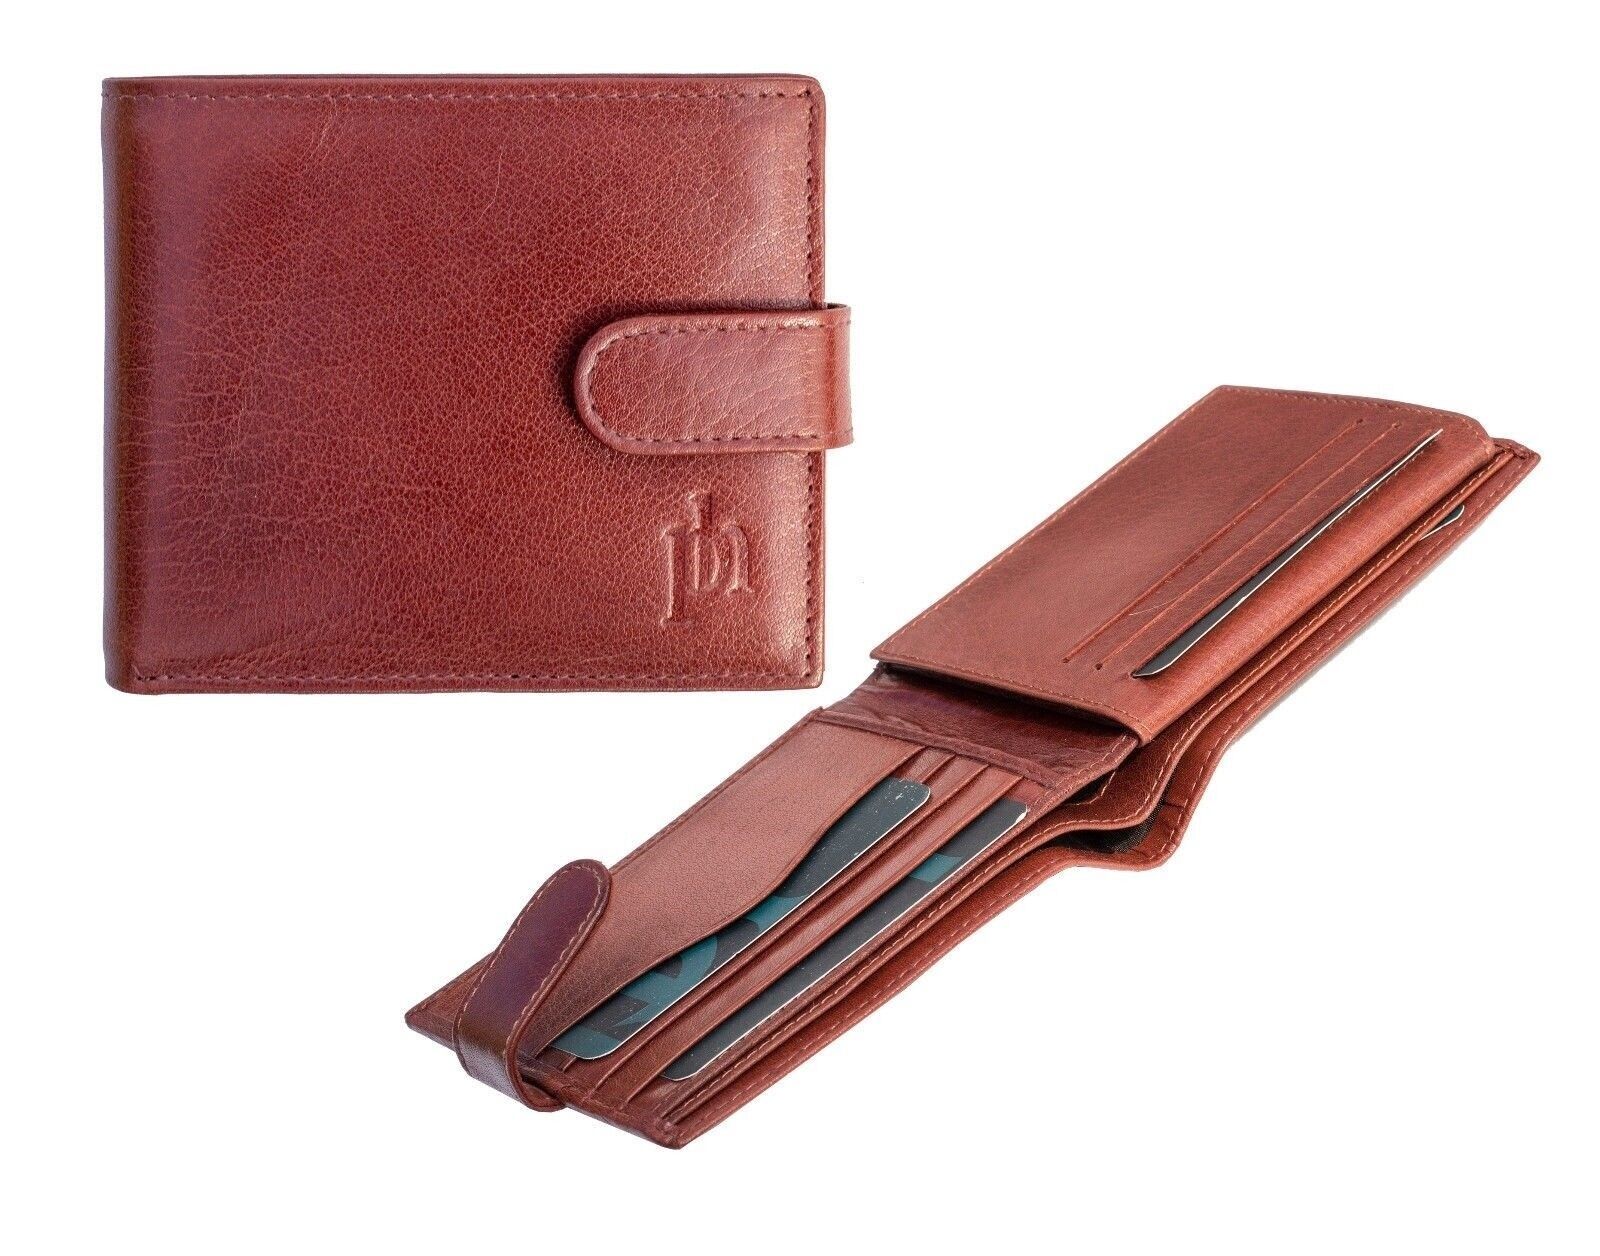 SALE NEW from Prime Hide Gorgeous Mens Brown Leather Flip Up Style Wallet